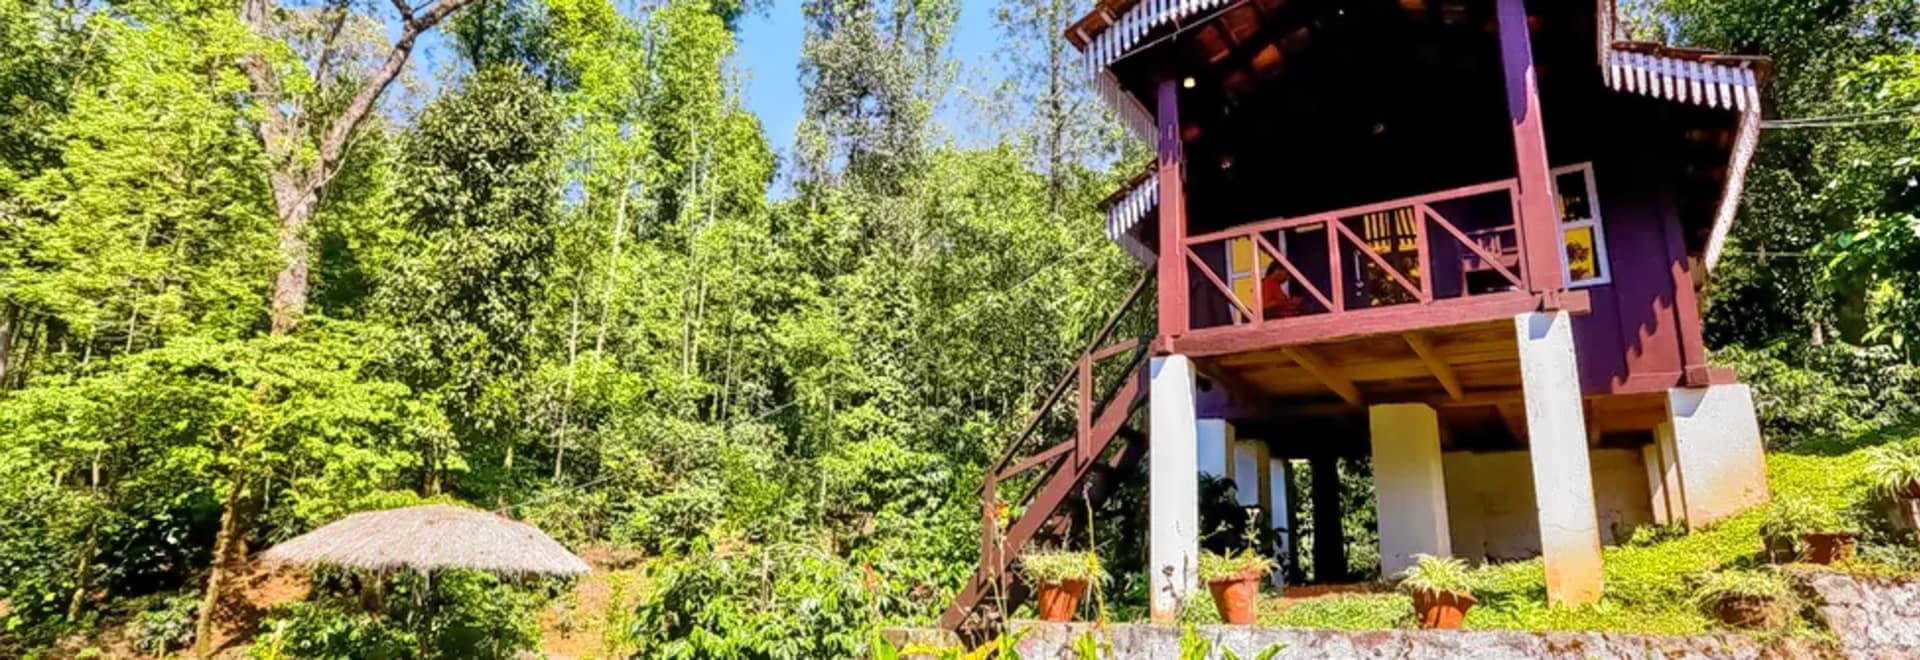 Chikmagalur Experiential Stays